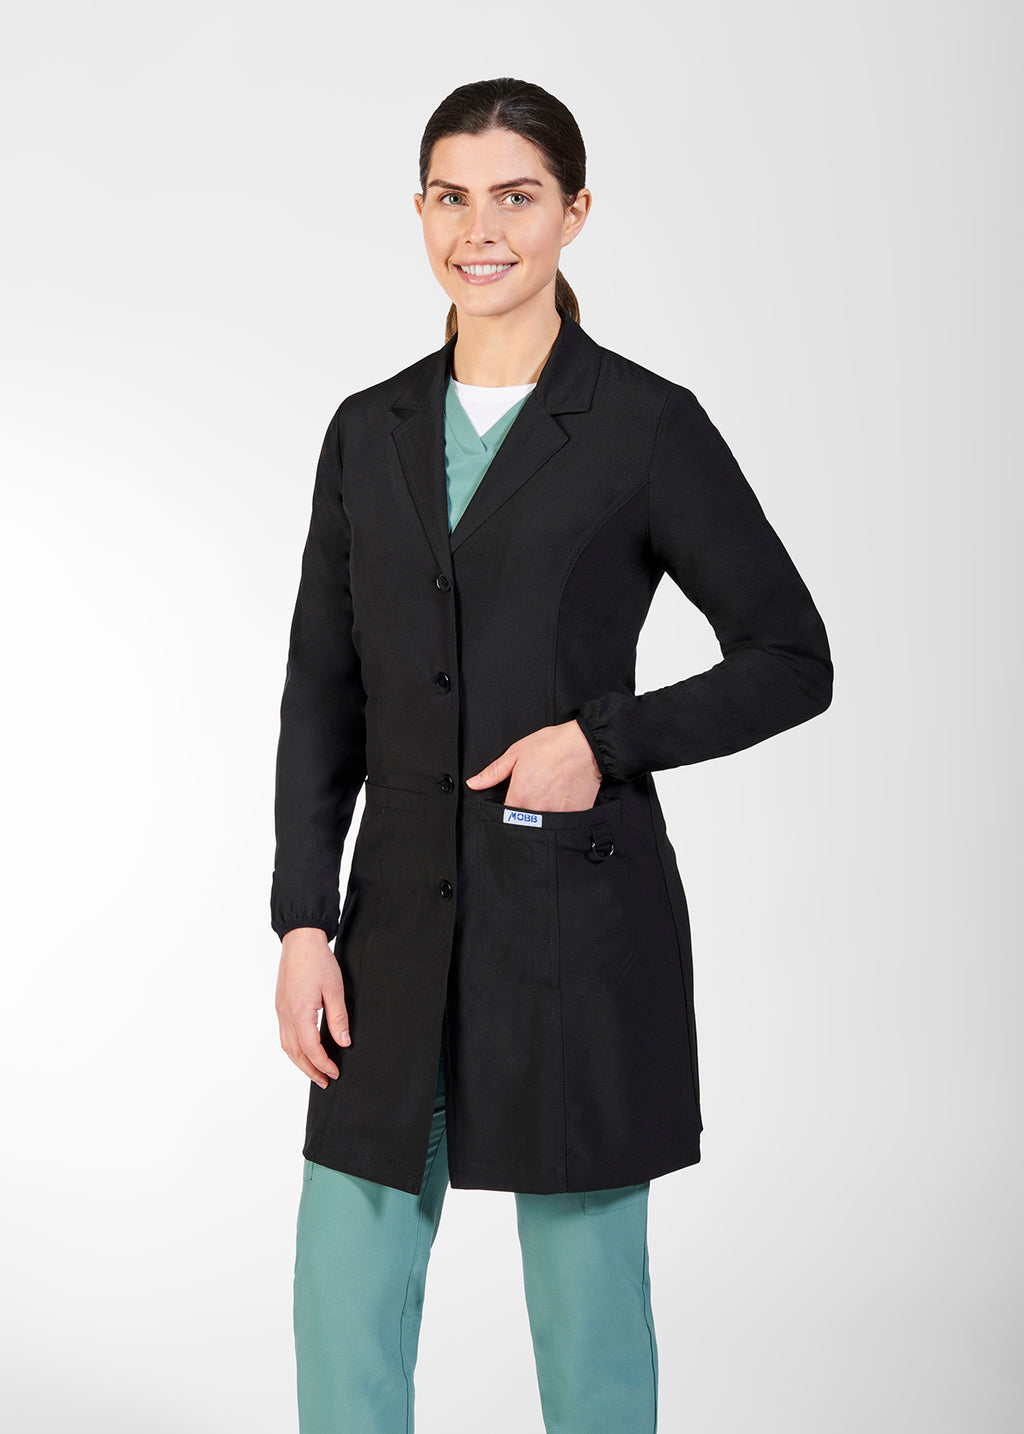 Product - The Marie Ladies Fitted Lab Coat by MOBB